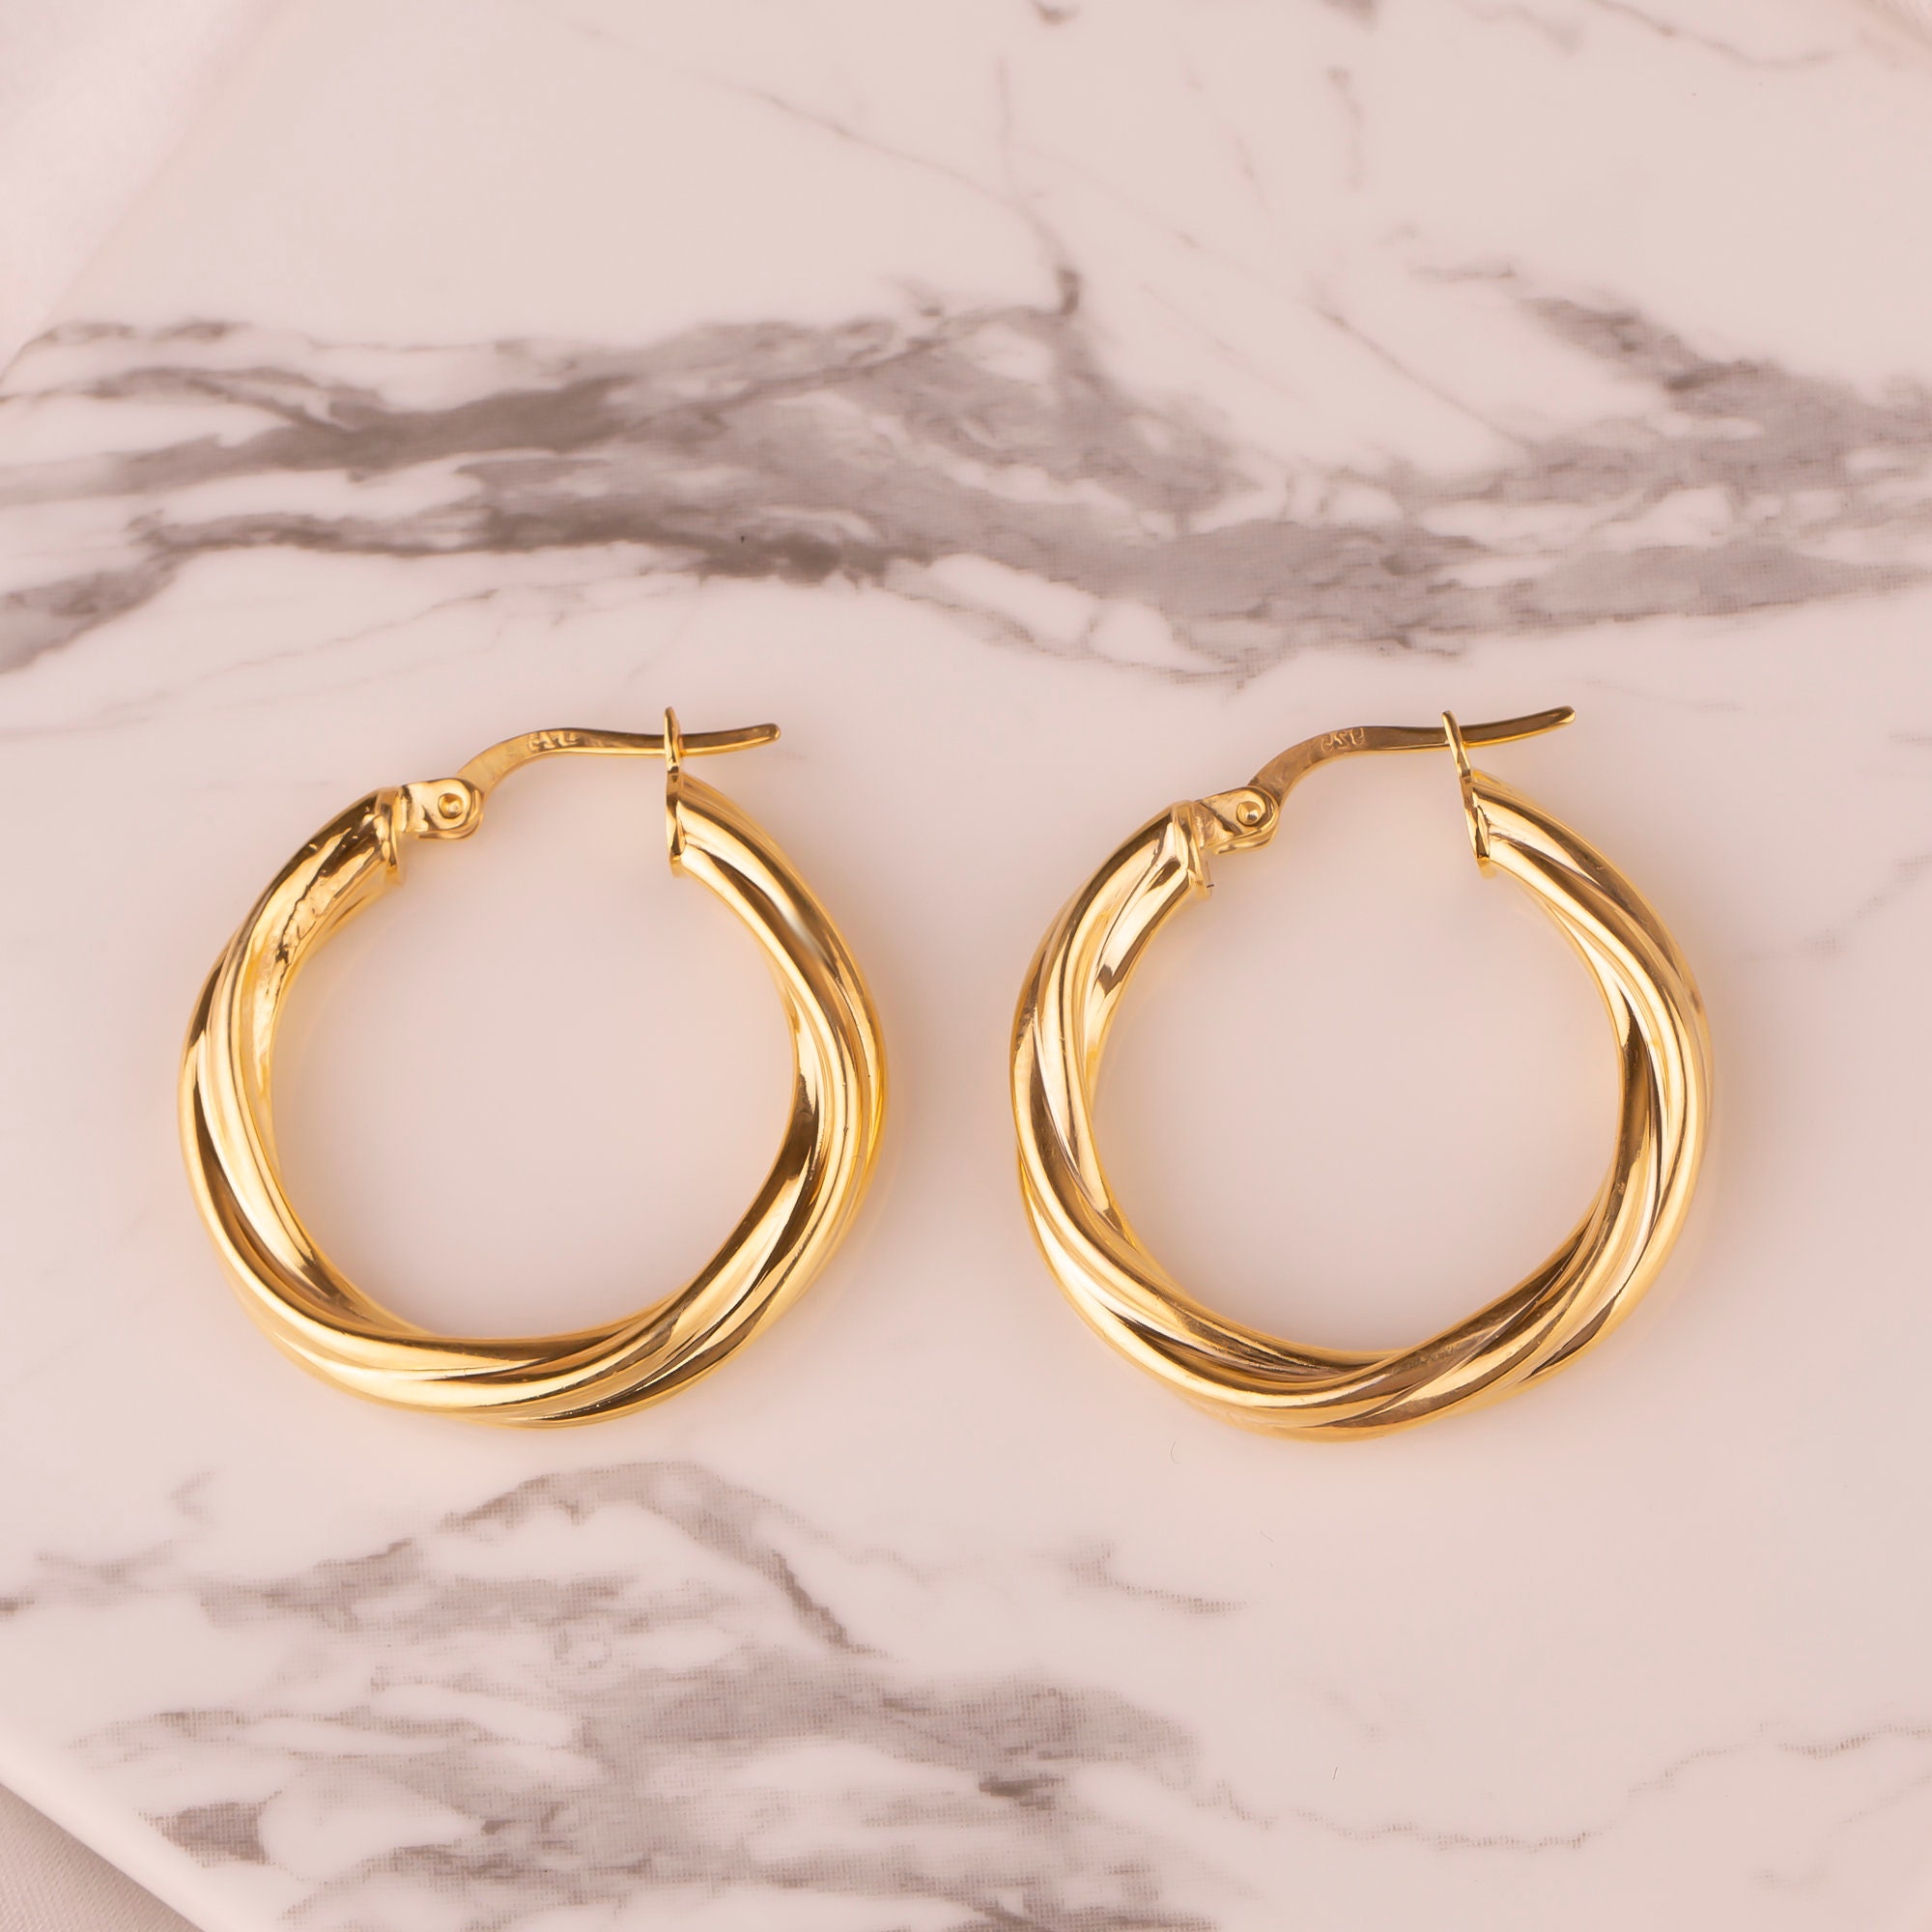 Chunky Twisted Gold Hoop Earrings 2 Size Circle Twisted - Etsy UK